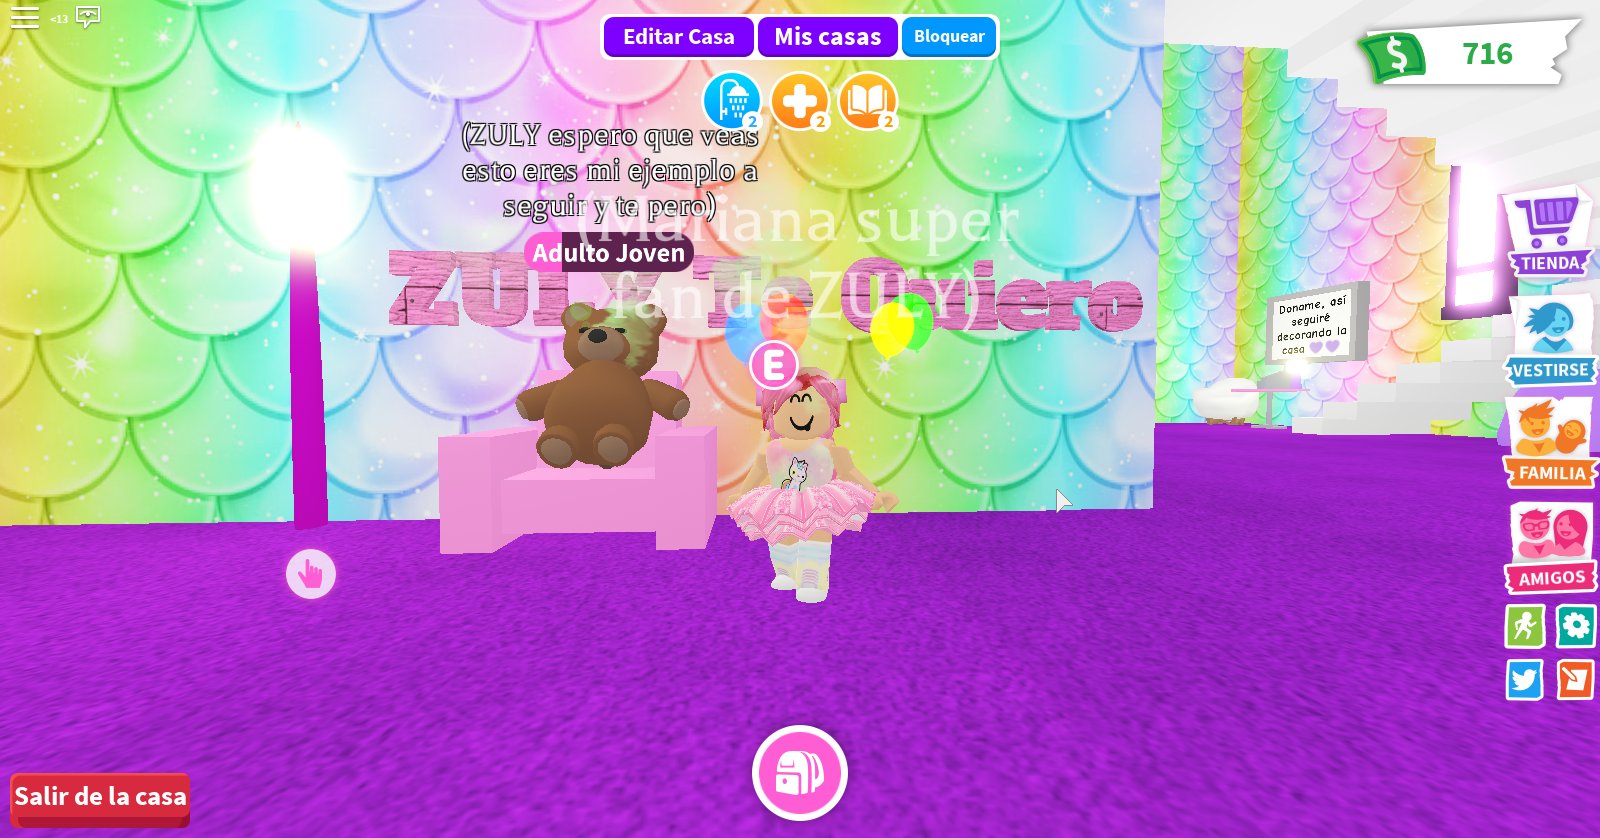 Mariana* Fan de Zuly on X: Adopt me please put the faces of dressing in  the roblox catalog I want it in my avatar. I hope that in the next gift  update